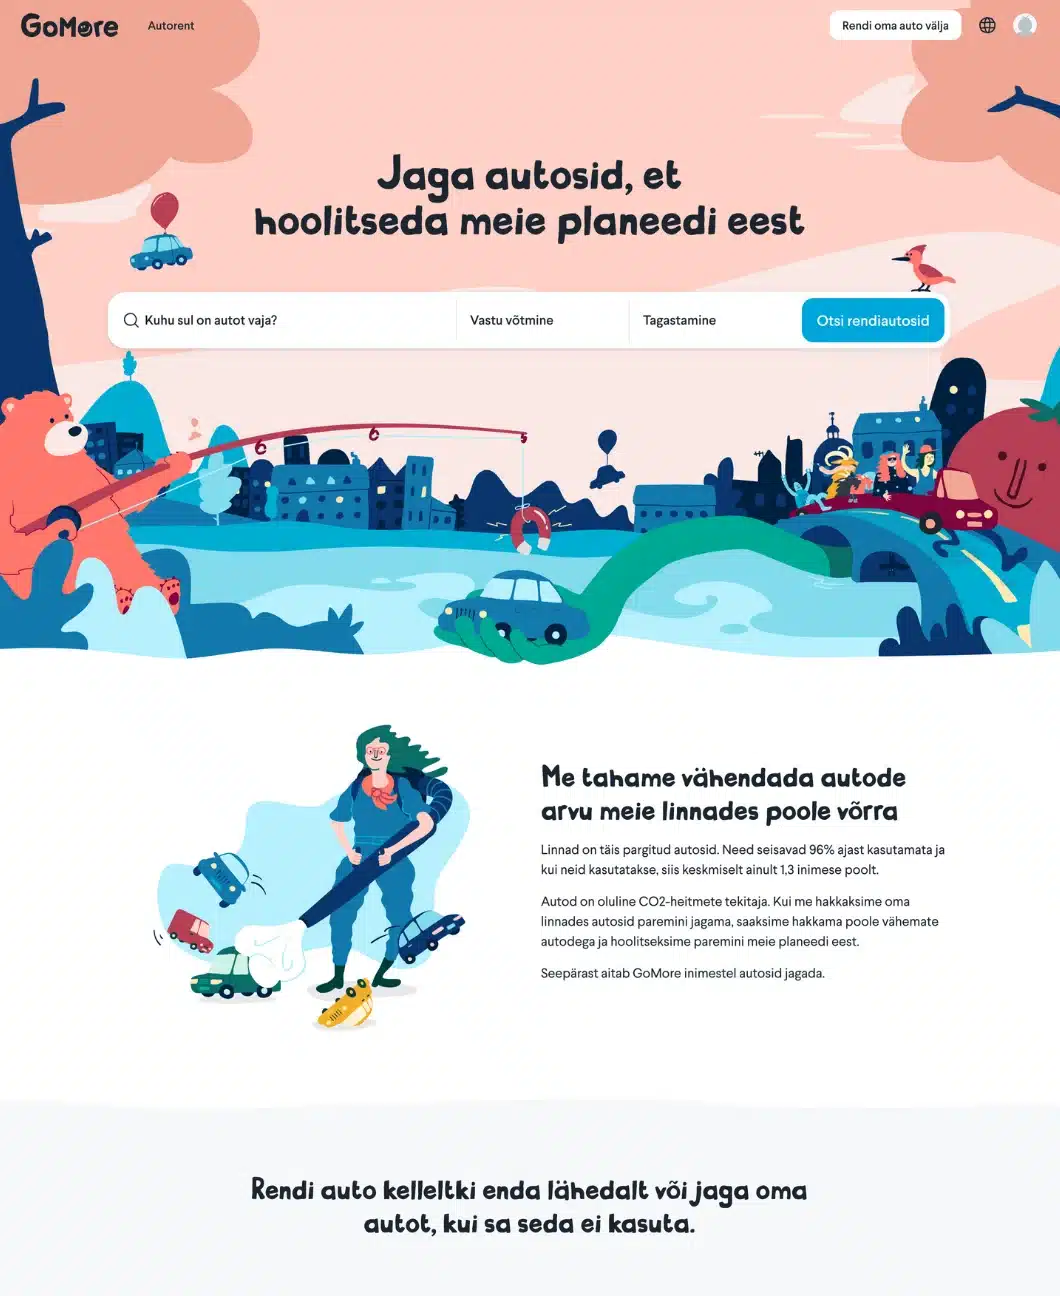 Website and App Translation by Laili - from English to Estonian, GoMore